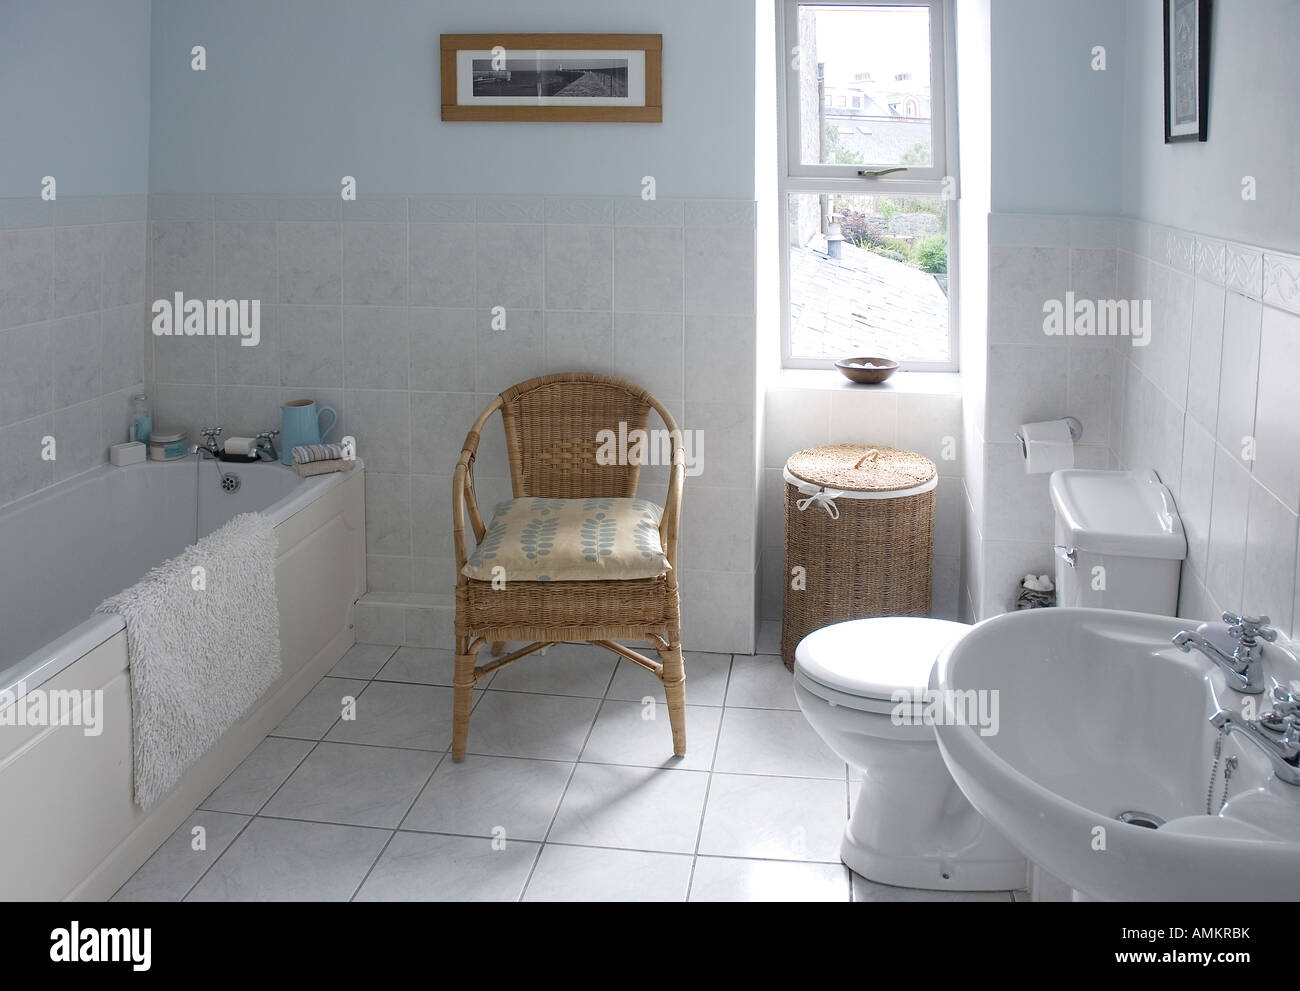 Bathroom interior with chair and tiled floor Stock Photo